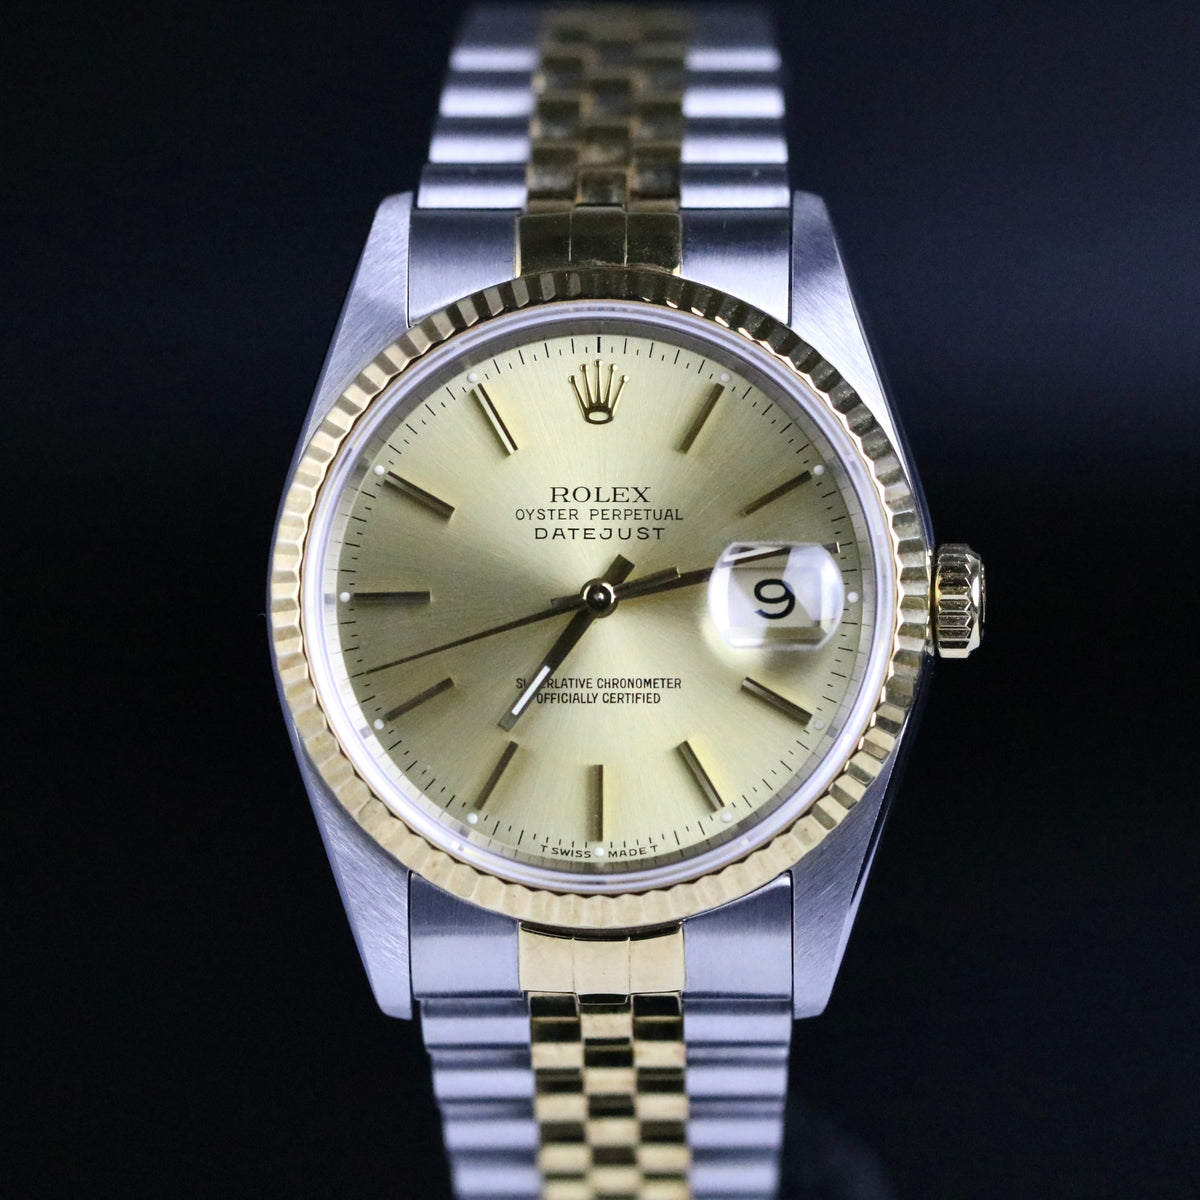 1991 Rolex 16233 Datejust 36mm Tight Bracelet with Box & Papers, RSC